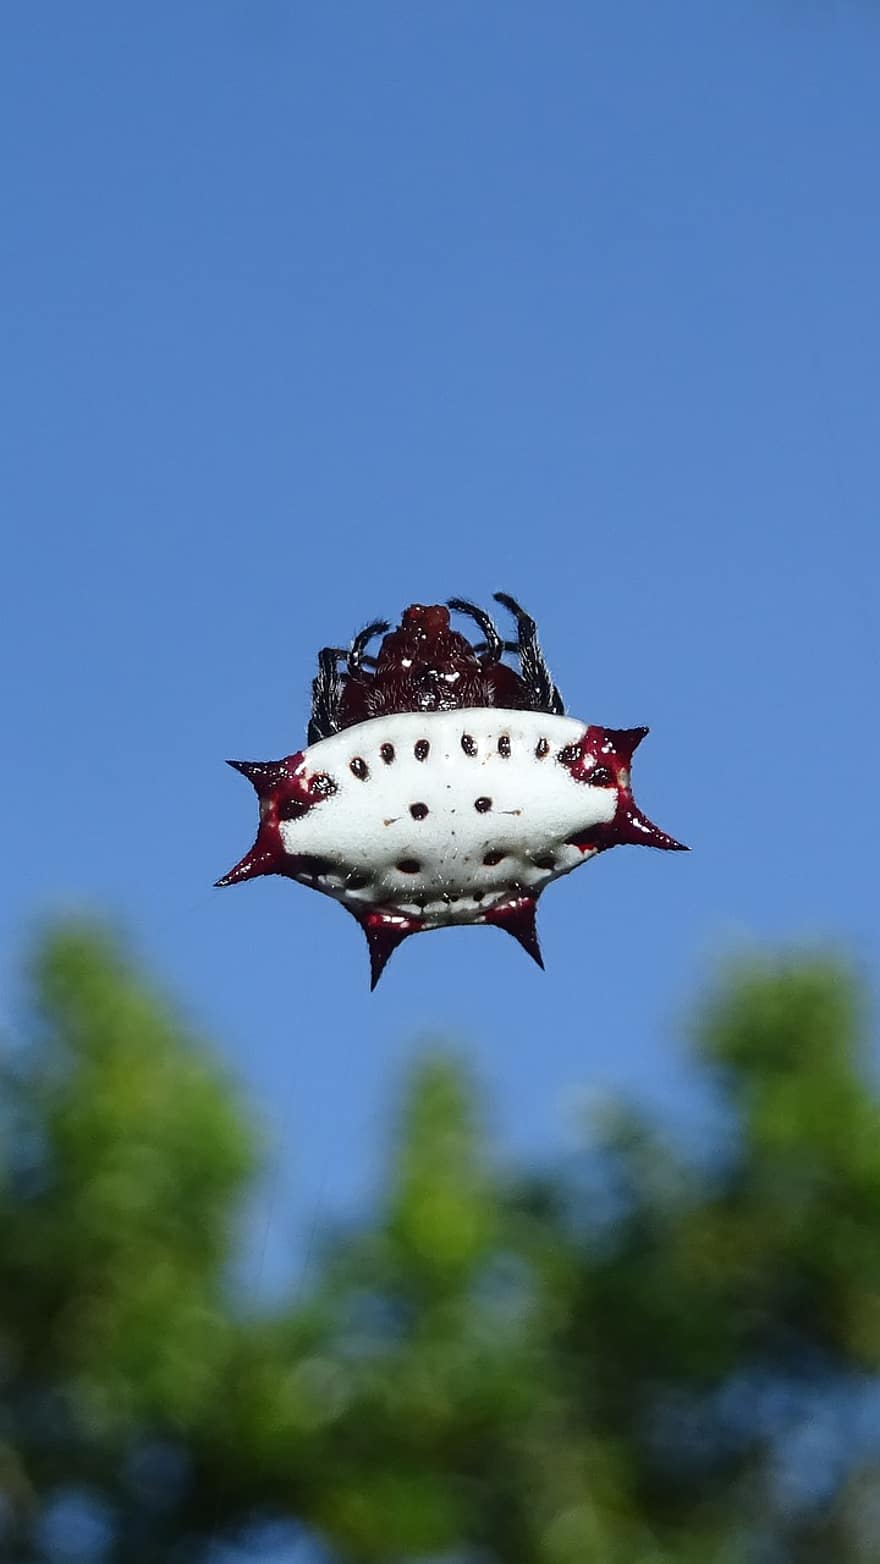 Spiny Orbweaver, spin, spinachtige, Spineybacked Orb Weaver Spider, witte spin, dier, blauwe lucht, natuur